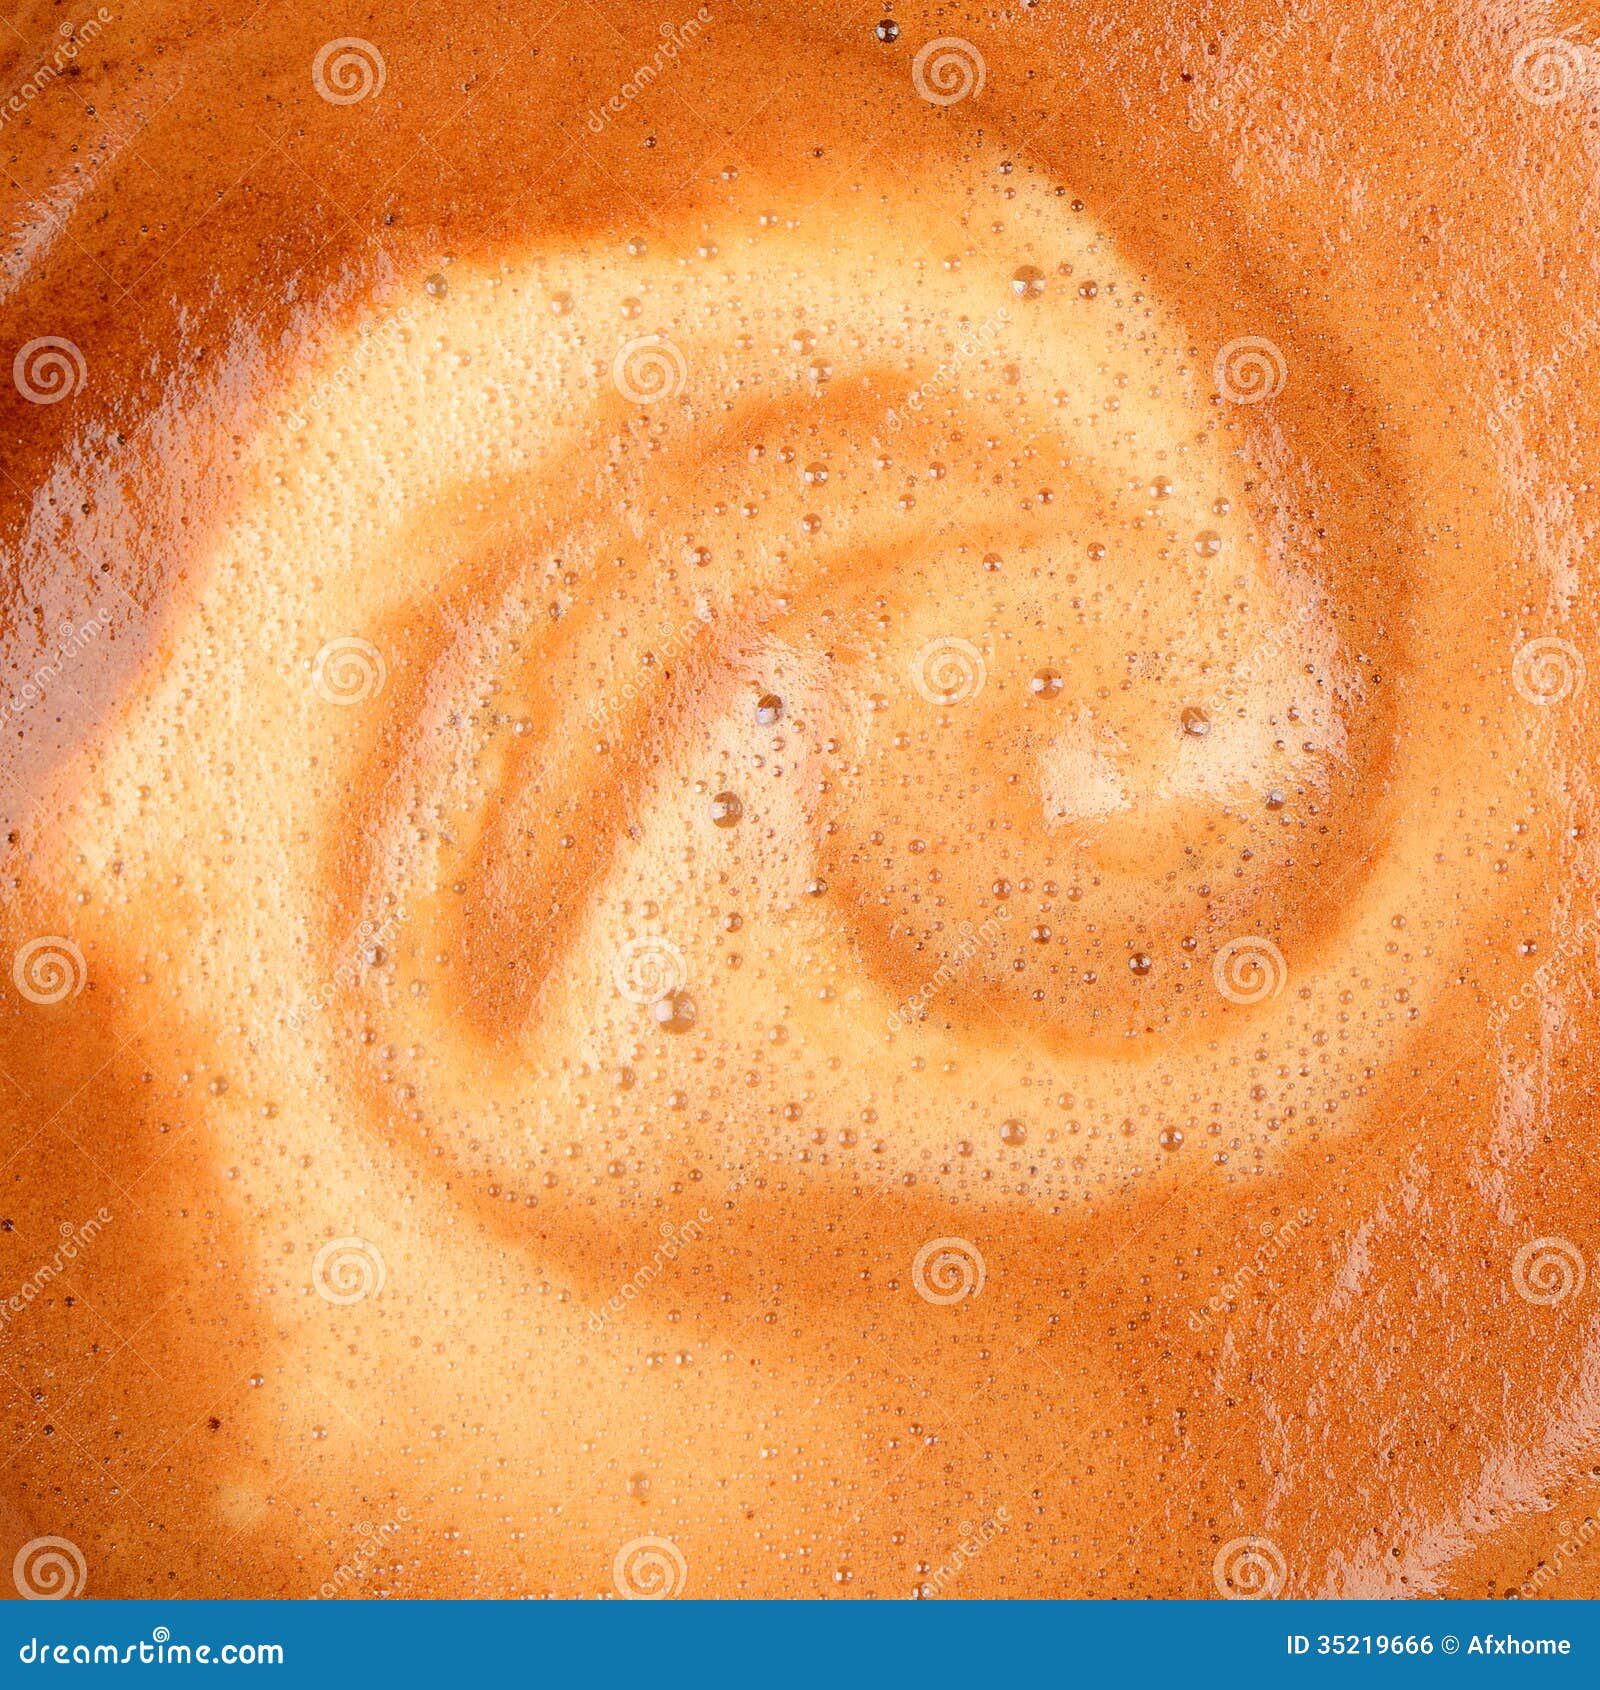 Coffee Foam Texture Stock Photo, Picture and Royalty Free Image. Image  44589782.